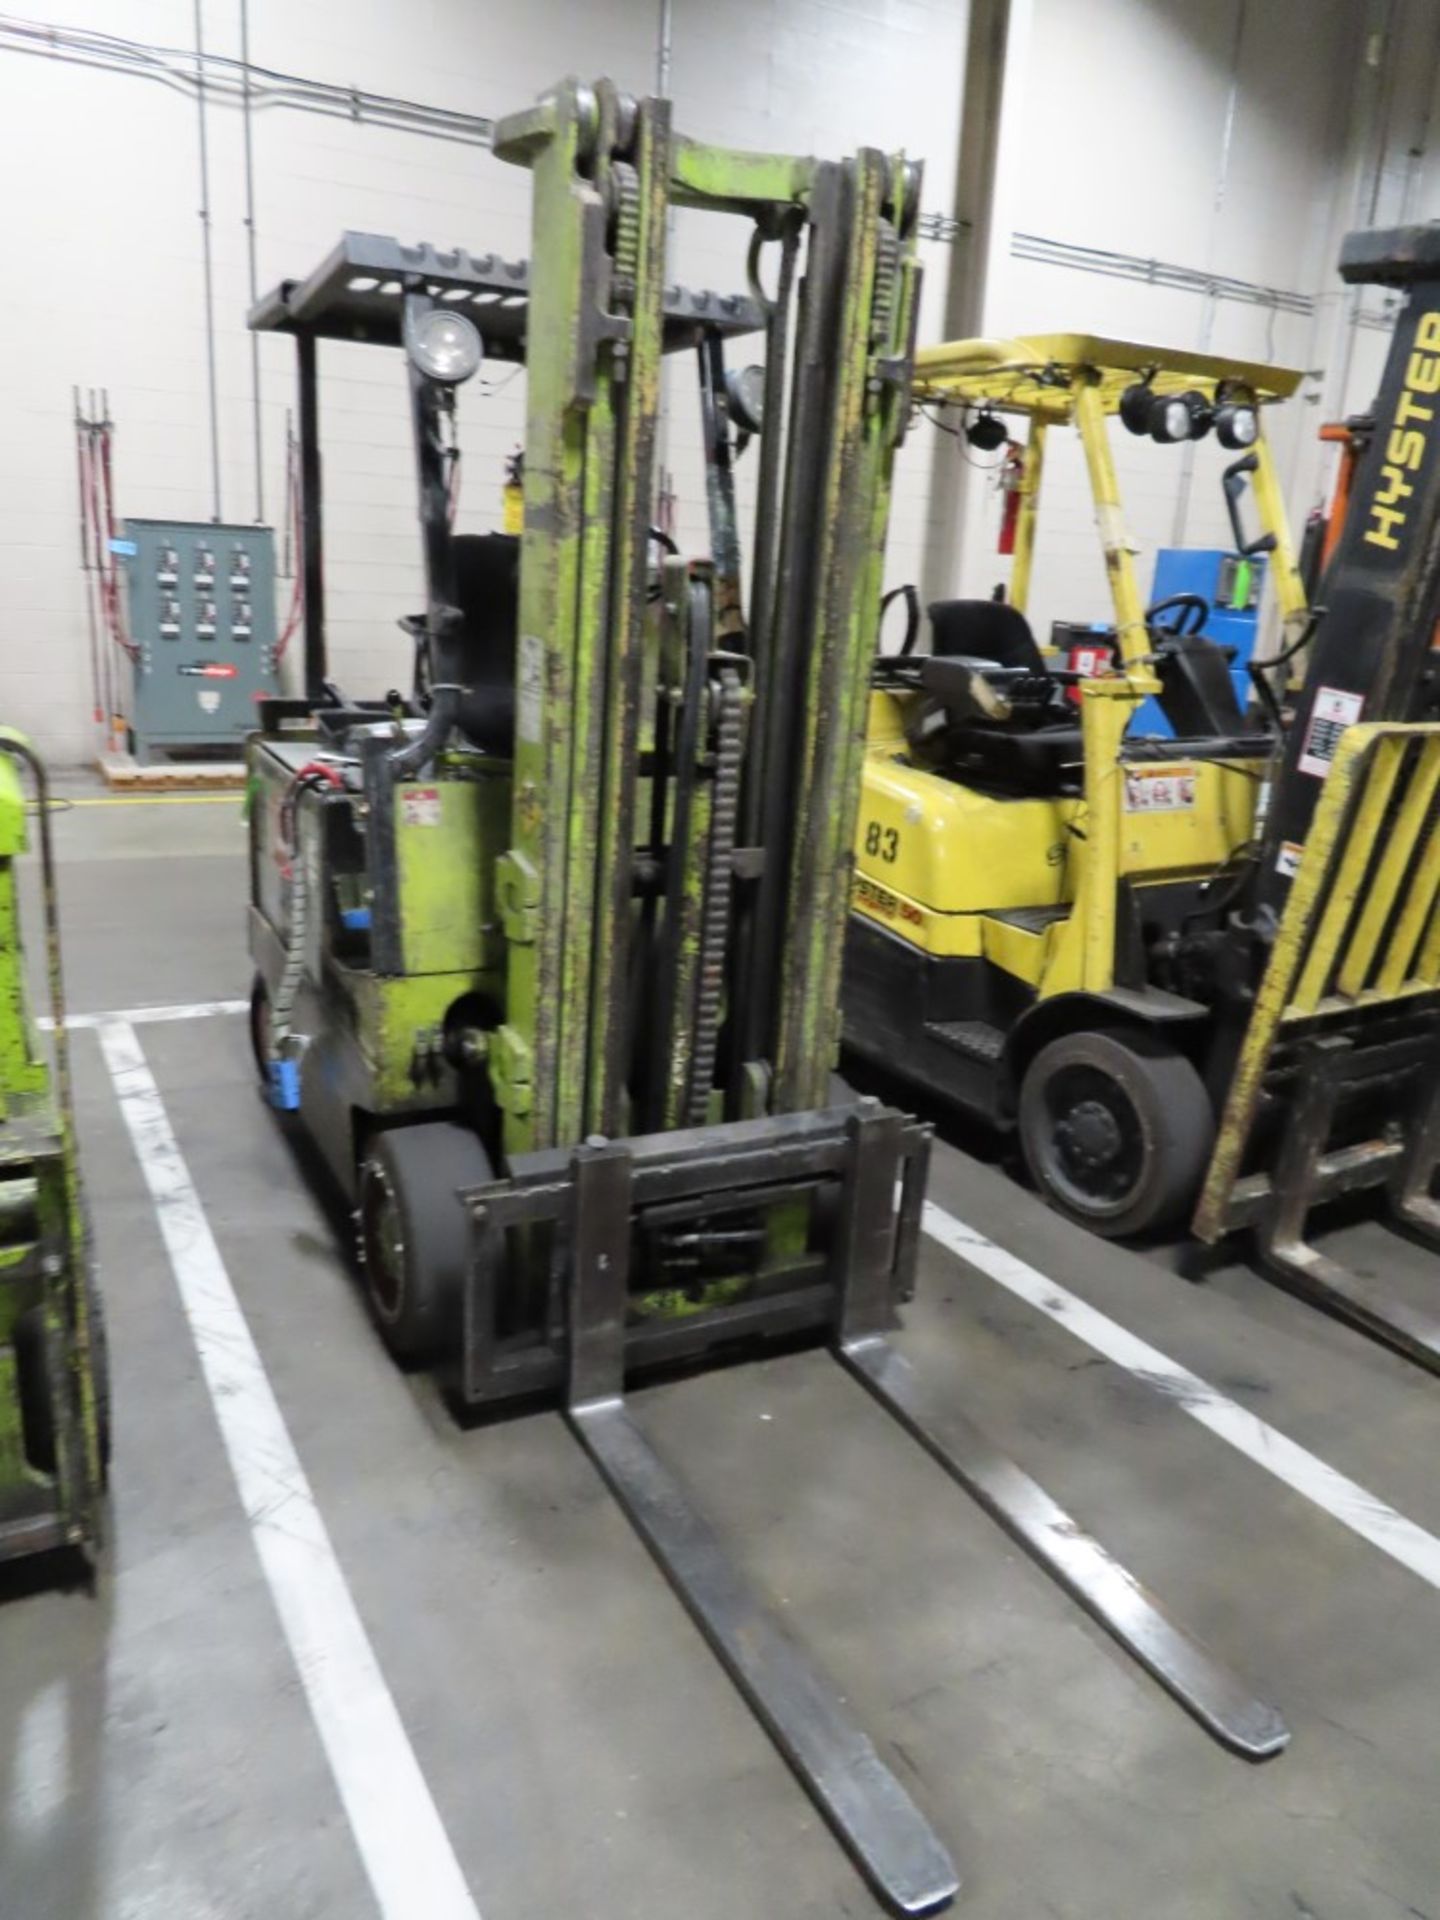 HYSTER APPROXIMATELY 3,000LB. CAPACITY ELECTRIC FORKLIFT TRUCK - Image 4 of 4